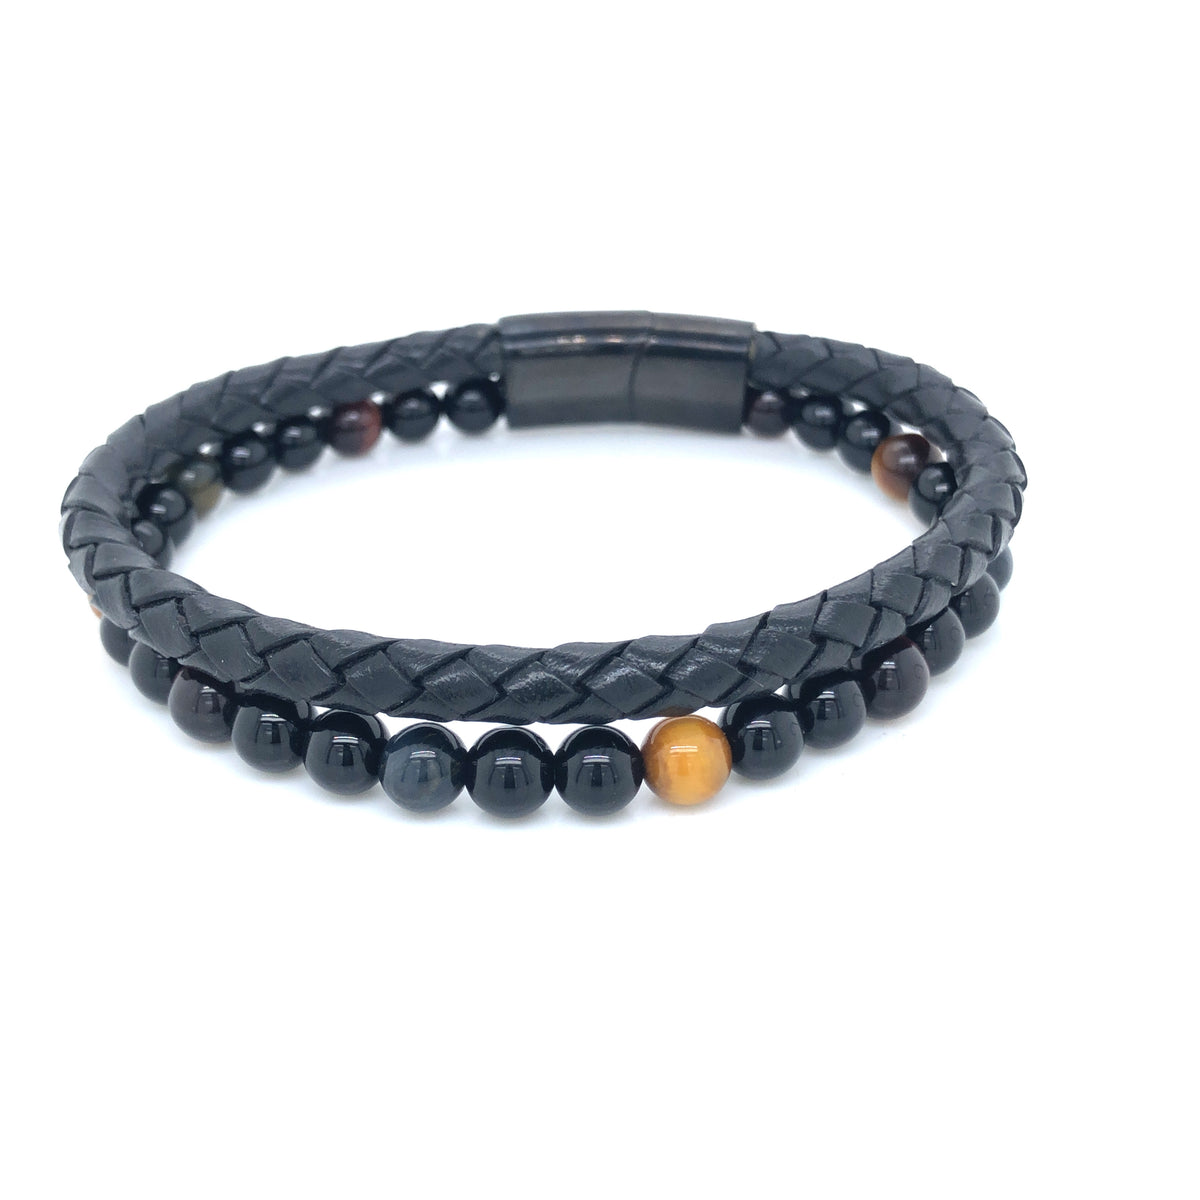 Double Strand Onyx/Tigers Eye Beads And Plaited Leather Bracelet